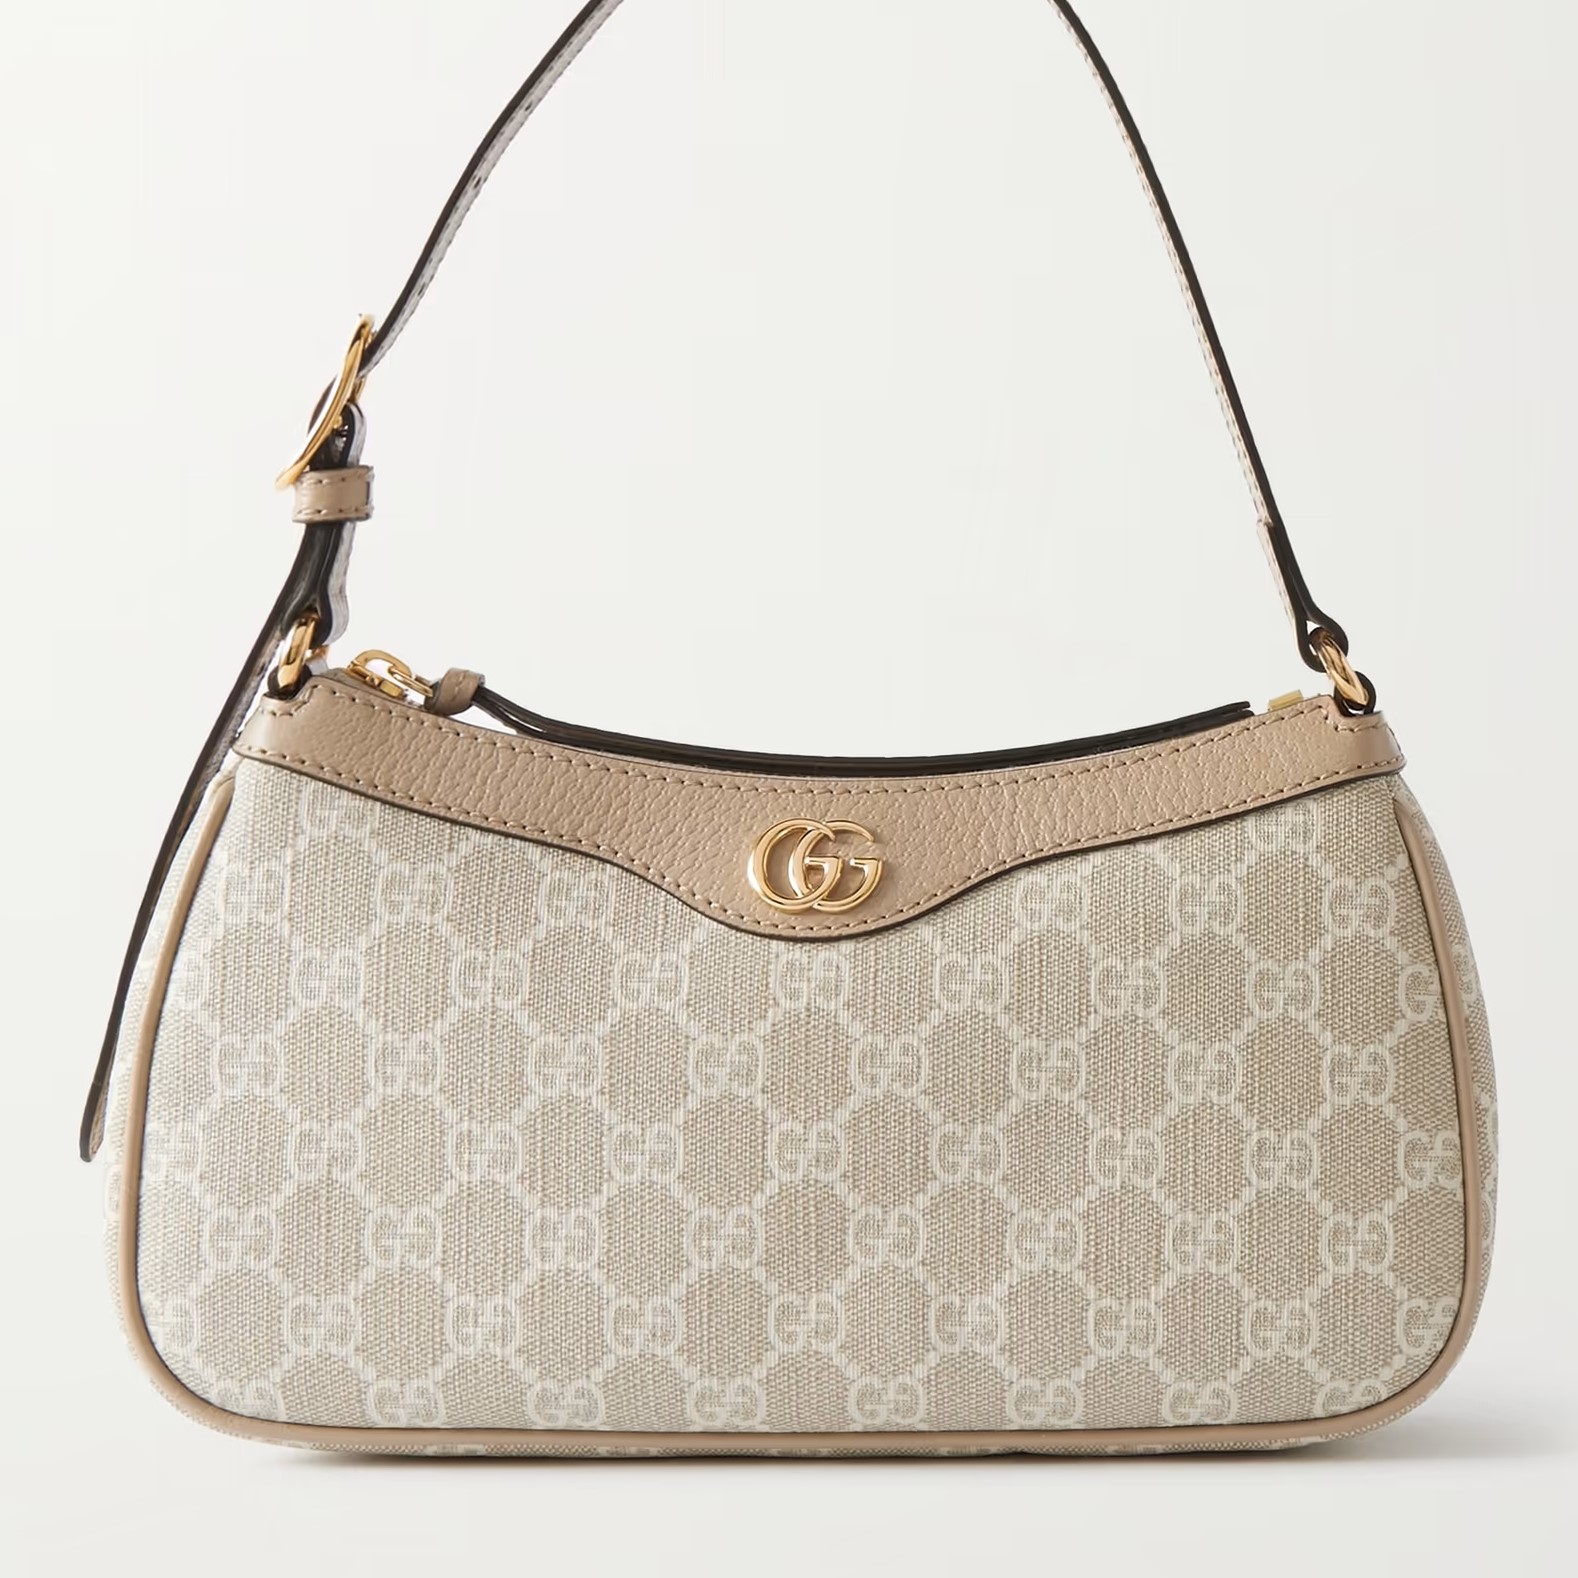 TÚI XÁCH NỮ GUCCI OPHIDIA EMBELLISHED TEXTURED LEATHER TRIMMED PRINTED COATED CANVAS SHOULDER BAG 2